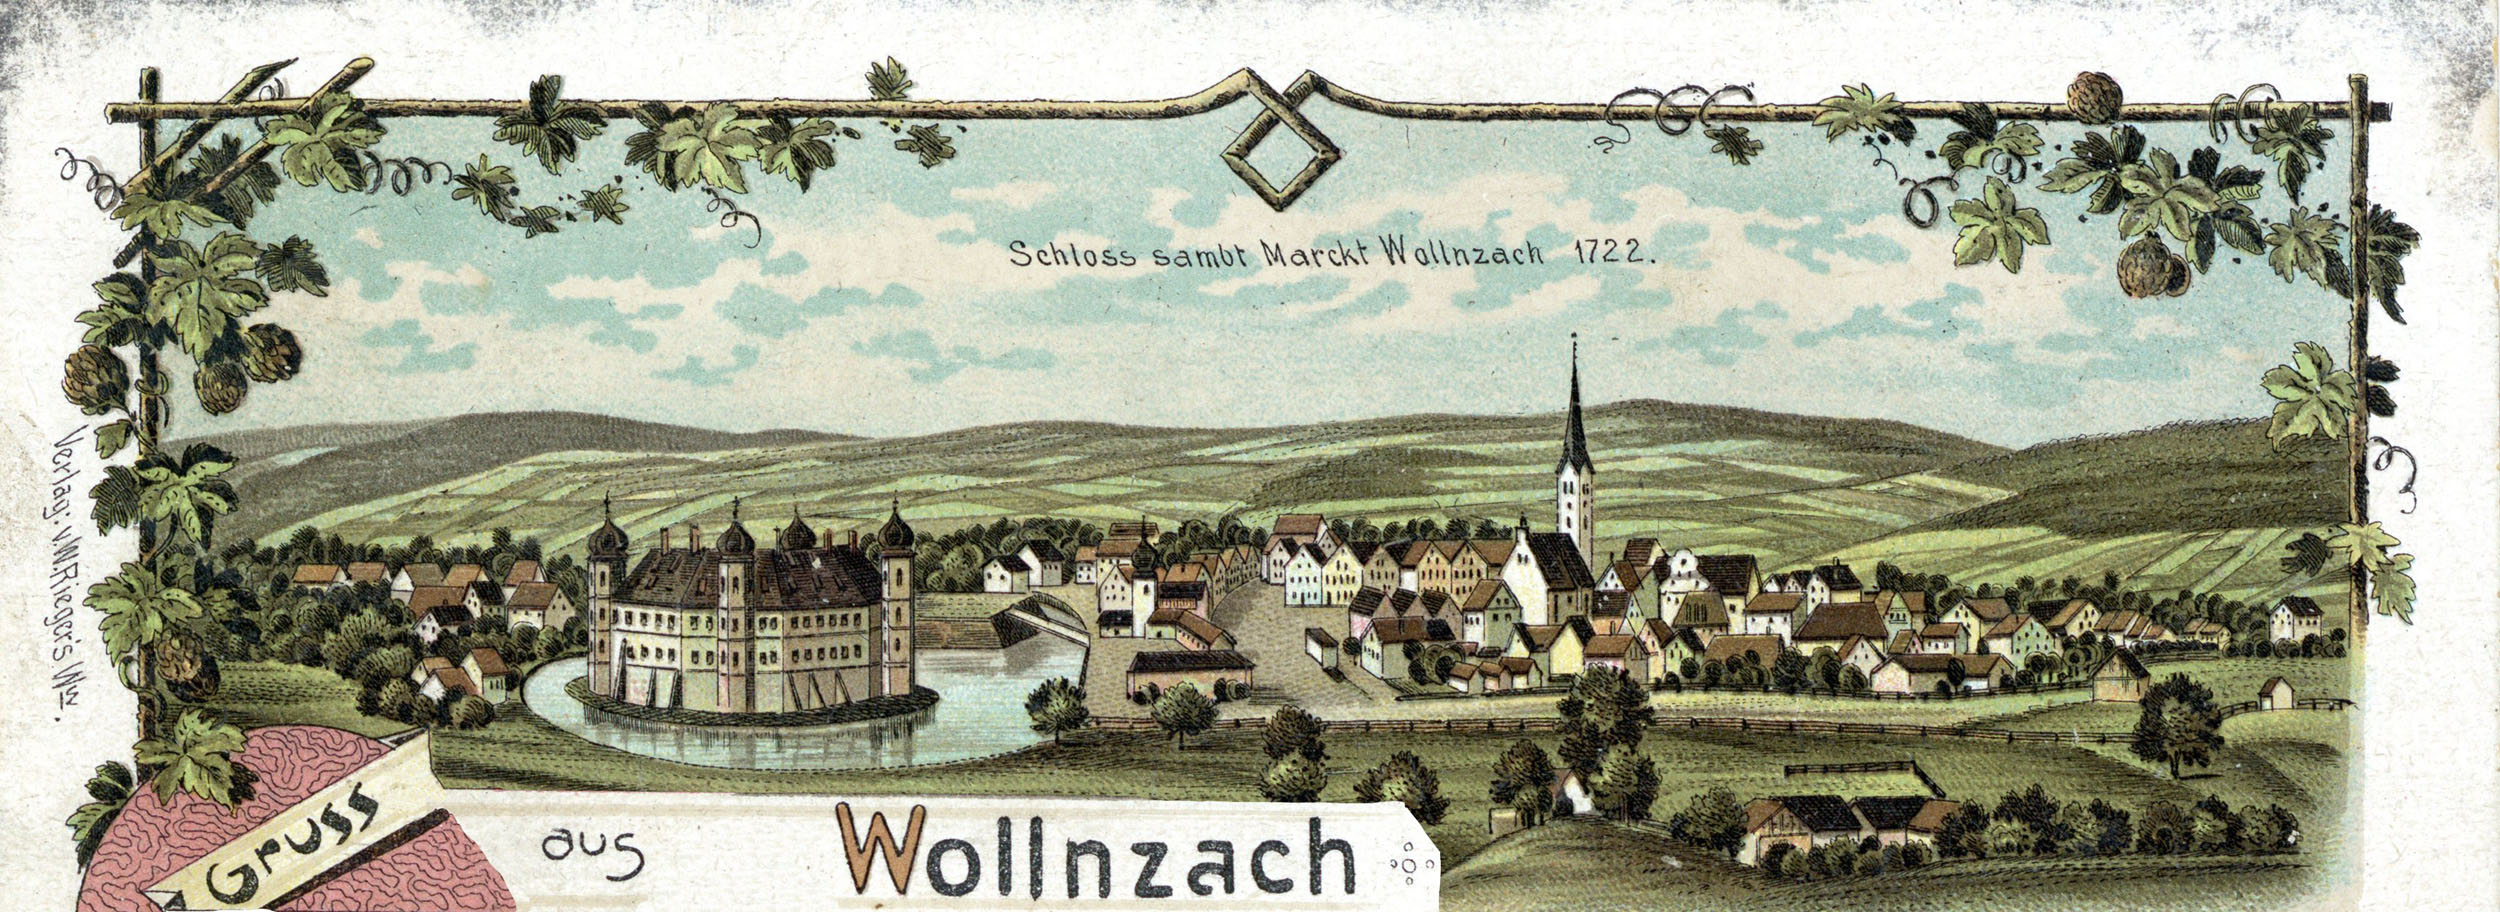 Old postcard from the Wolnzach market